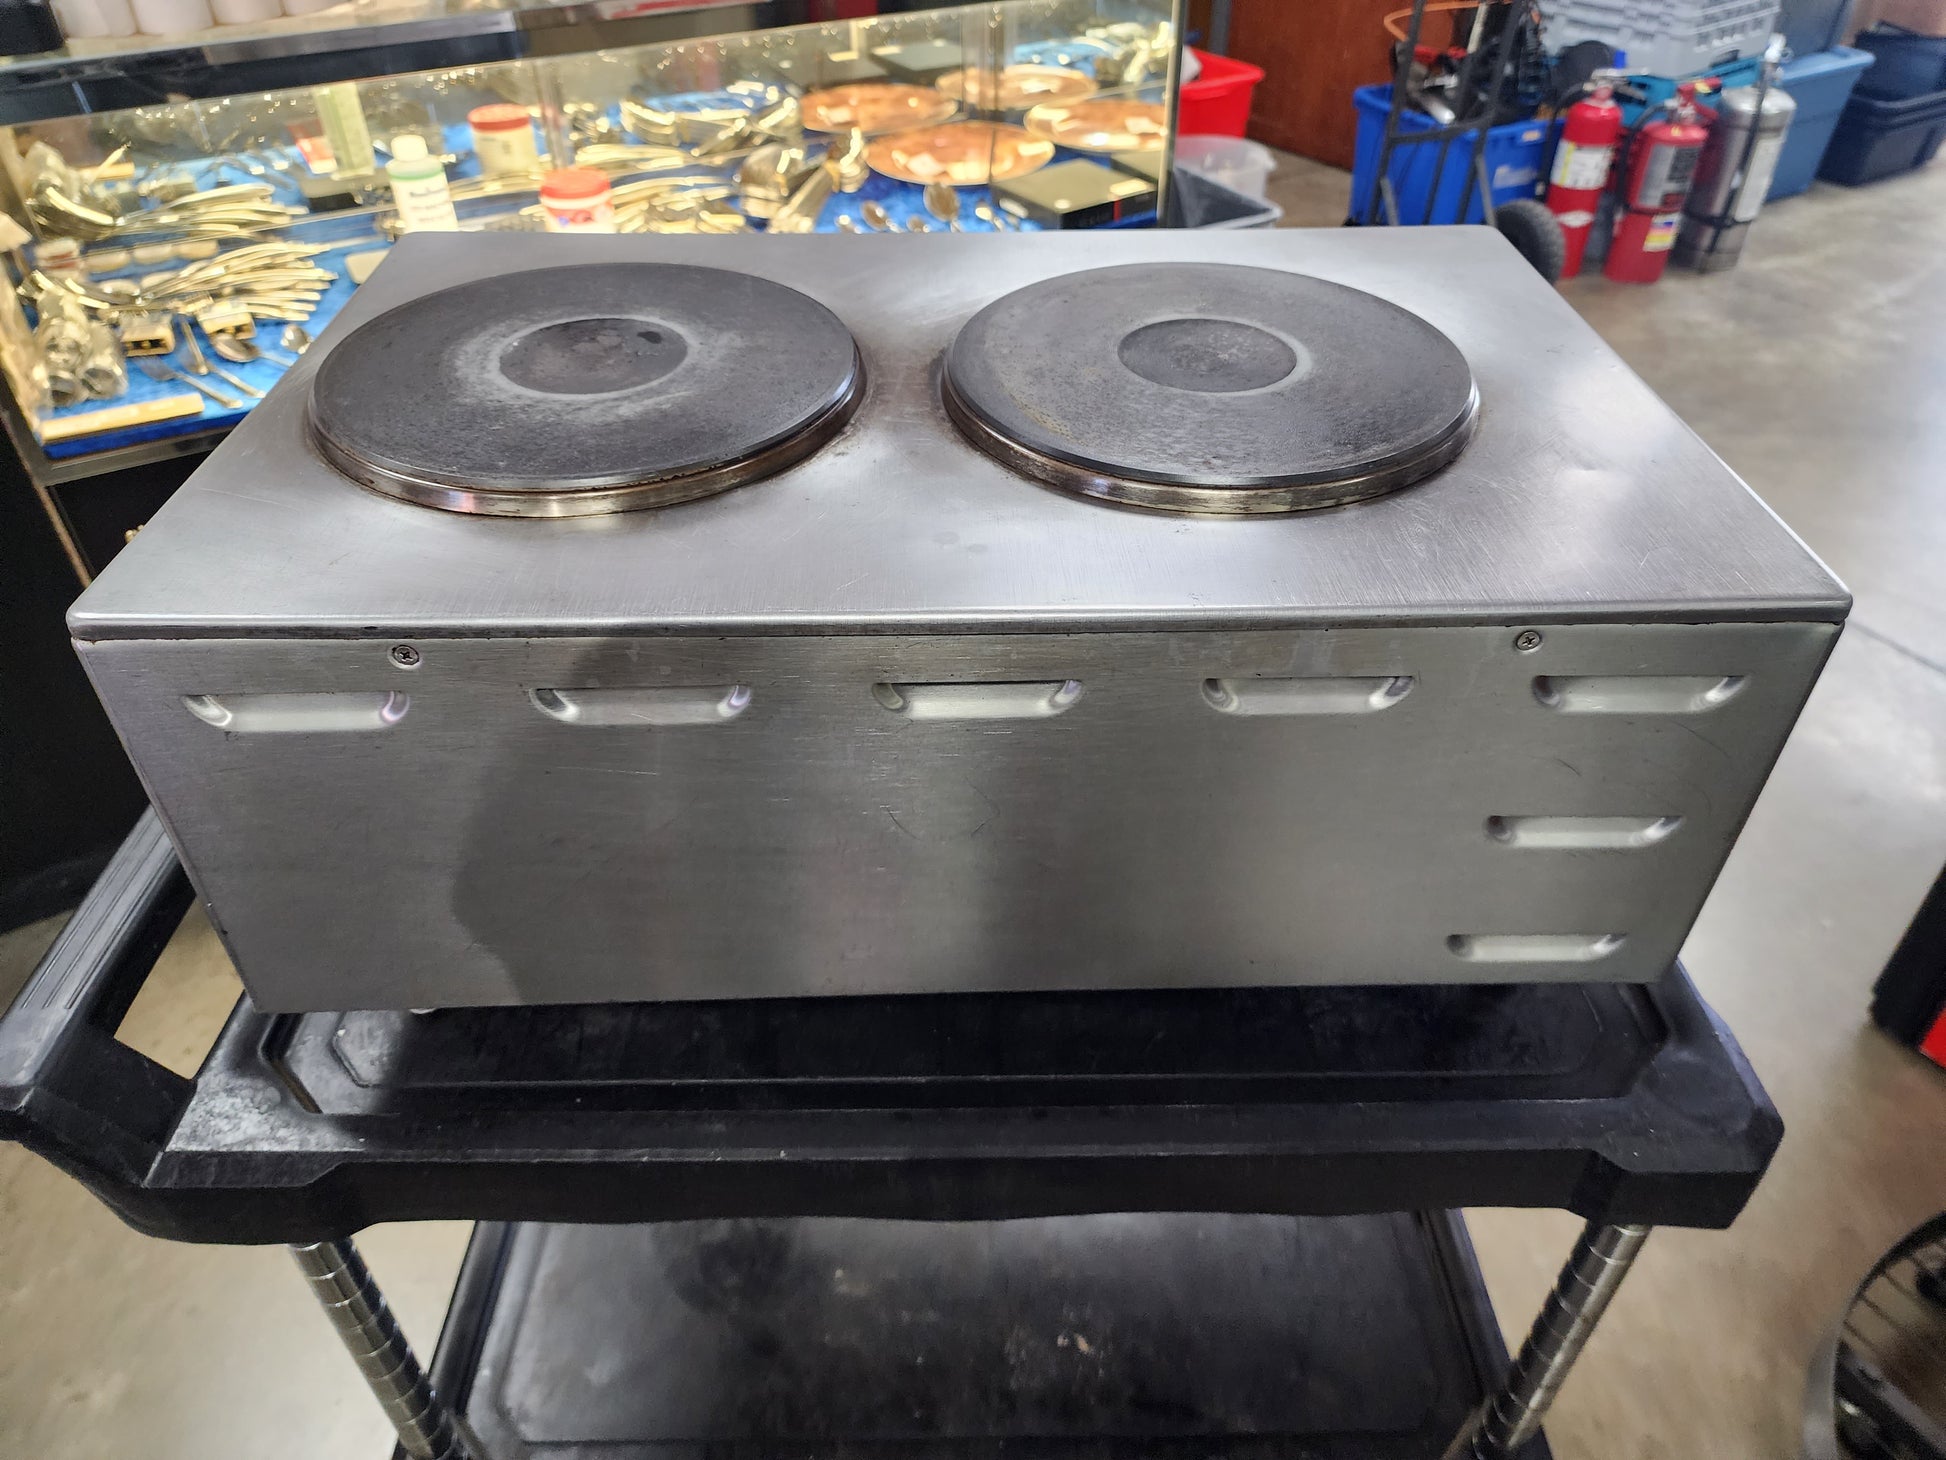 Electric Countertop Hot Plate, Model H70, Two Large Solid Elements